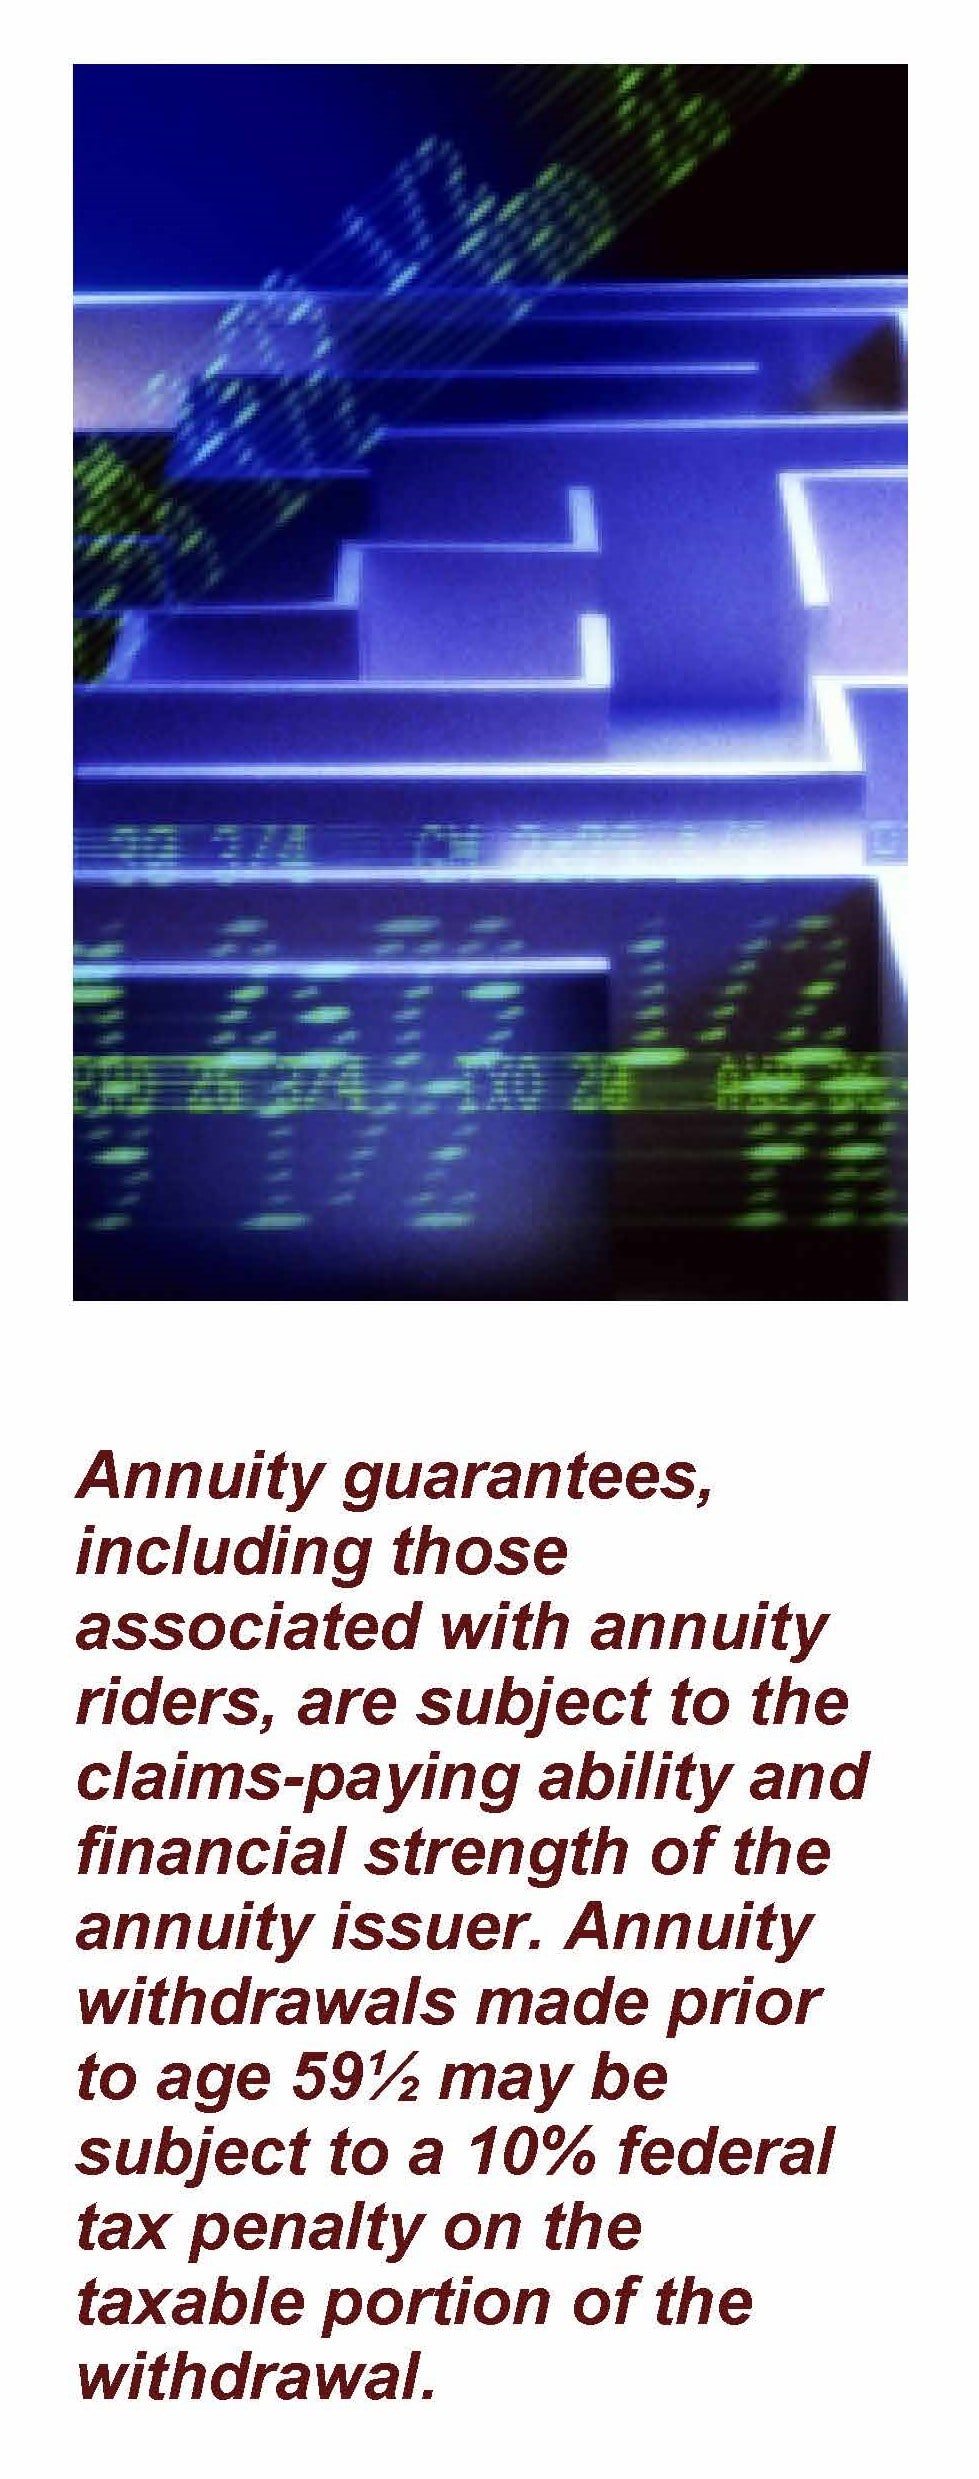 A maze with an overlay of financial numbers. Text under image reads: Annuity guarantees, including those associated with annuity riders, are subject to the claims-paying ability and financial strength of the annuity issuer. Annuity withdrawals made prior to age 59½ may be subject to a 10% federal tax penalty on the taxable portion of the withdrawal. Article title: Common Annuity Riders